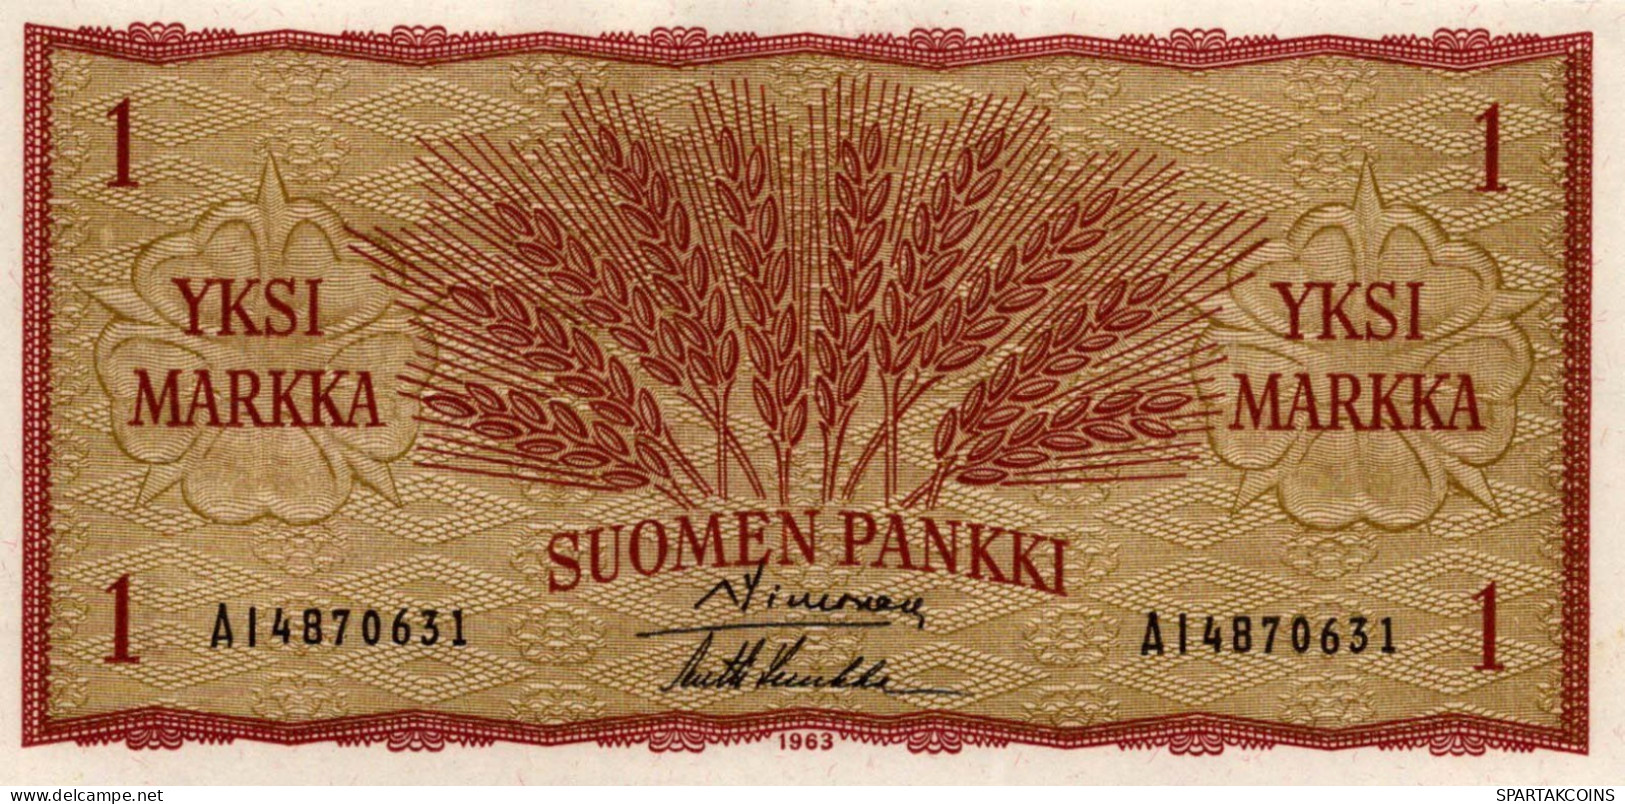 1 MARK 1963 FINLAND Papiergeld Banknote #PJ576 - [11] Local Banknote Issues